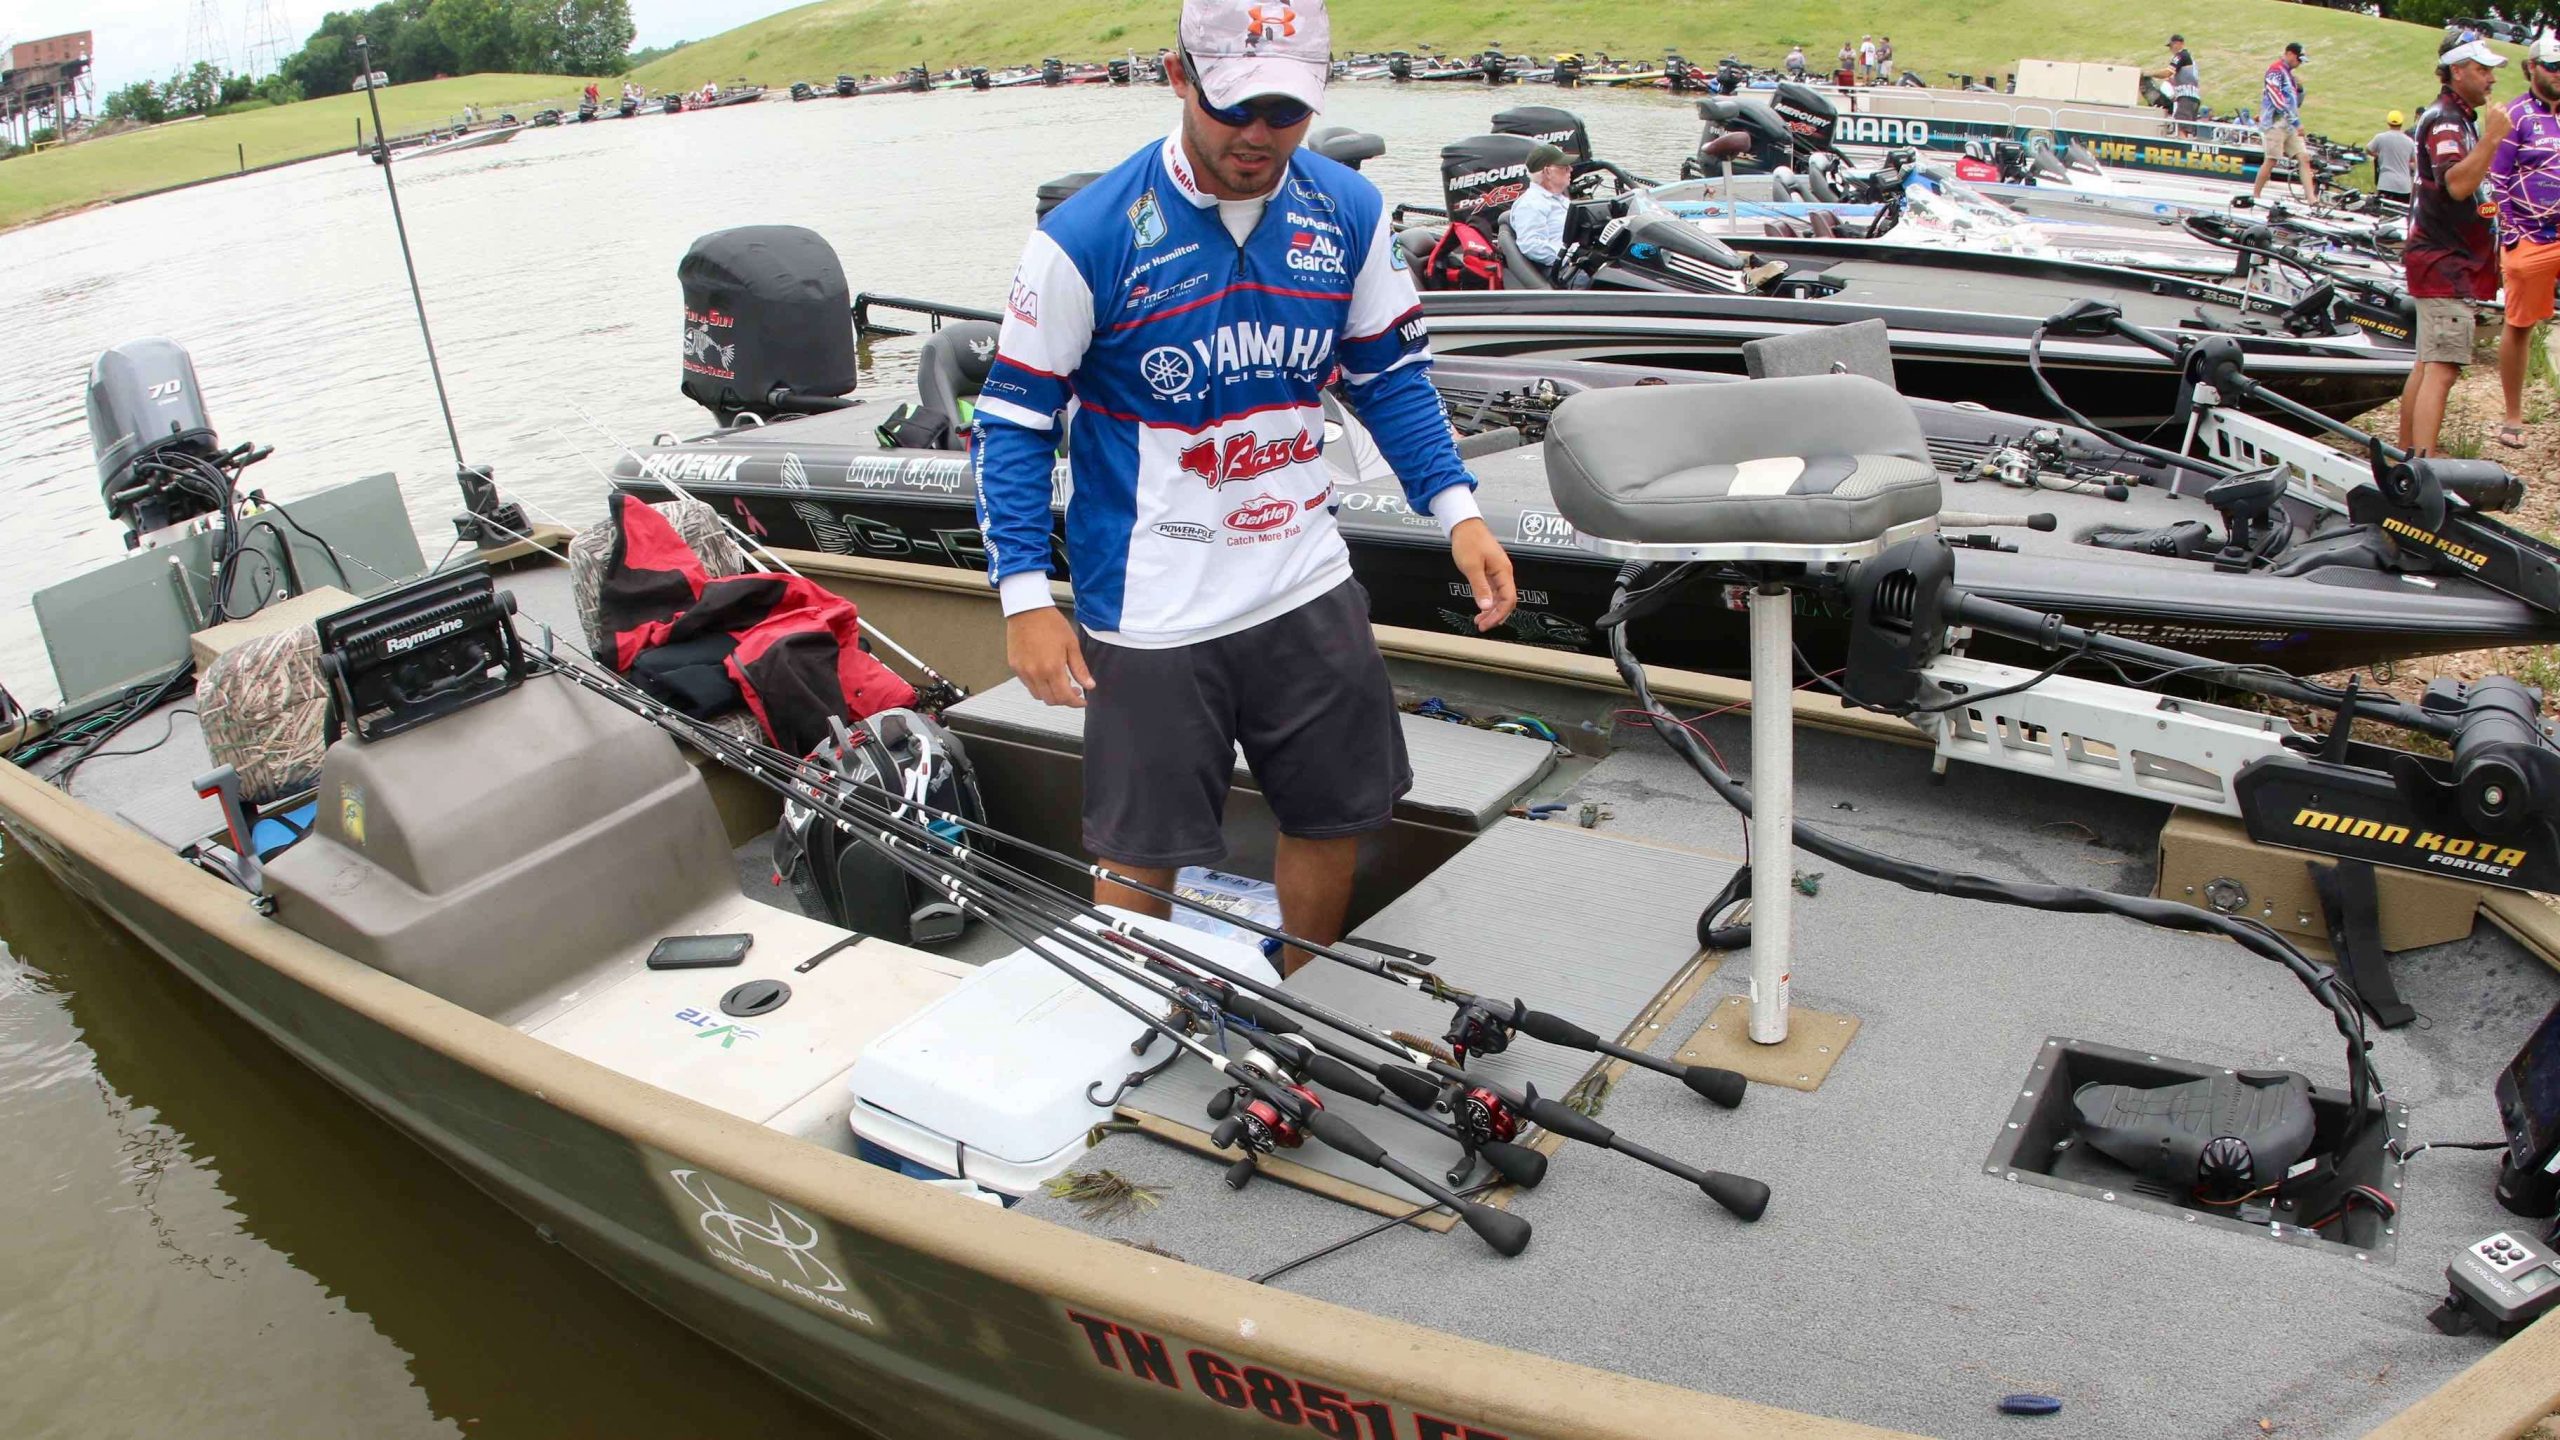 Skylar Hamilton of Dandridge, Tenn., is one of several anglers who chose to bring an aluminum boat, which allowed navigation through some shallow backwaters of the Arkansas River. Hamilton is in 15th place with 13-12.